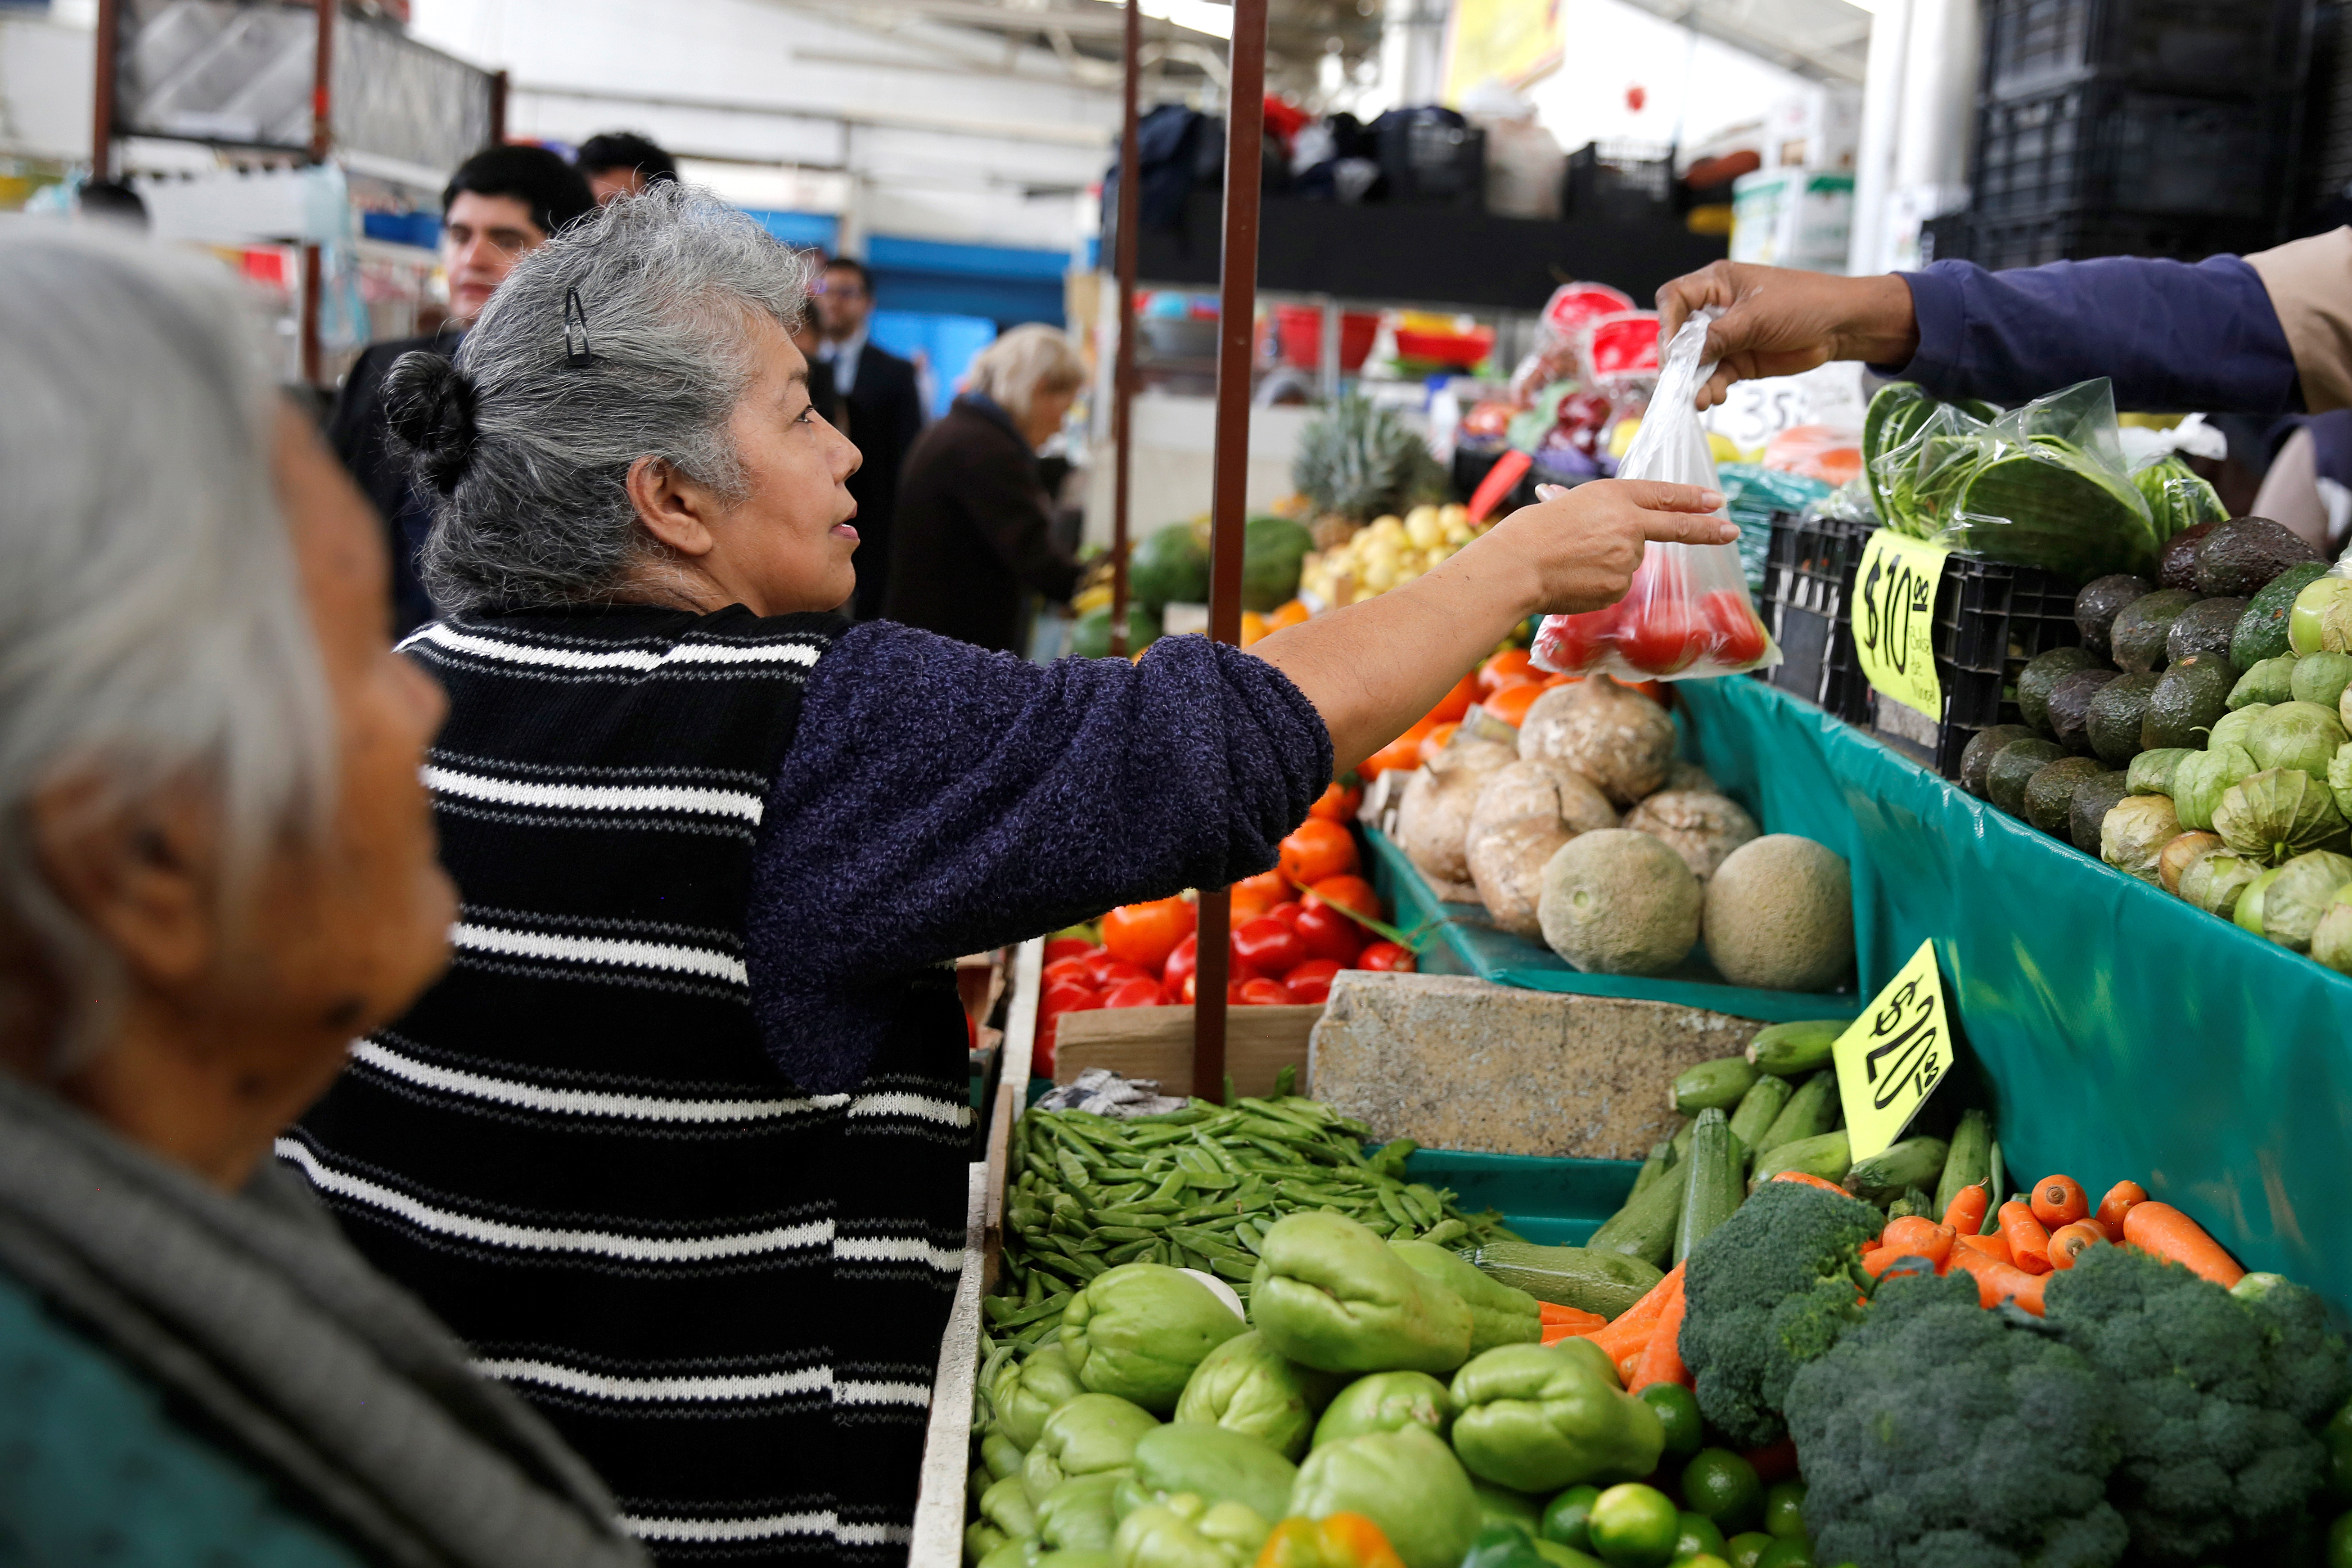 Woman buys tomatoes in a groceries stall at Granada market in Mexico City